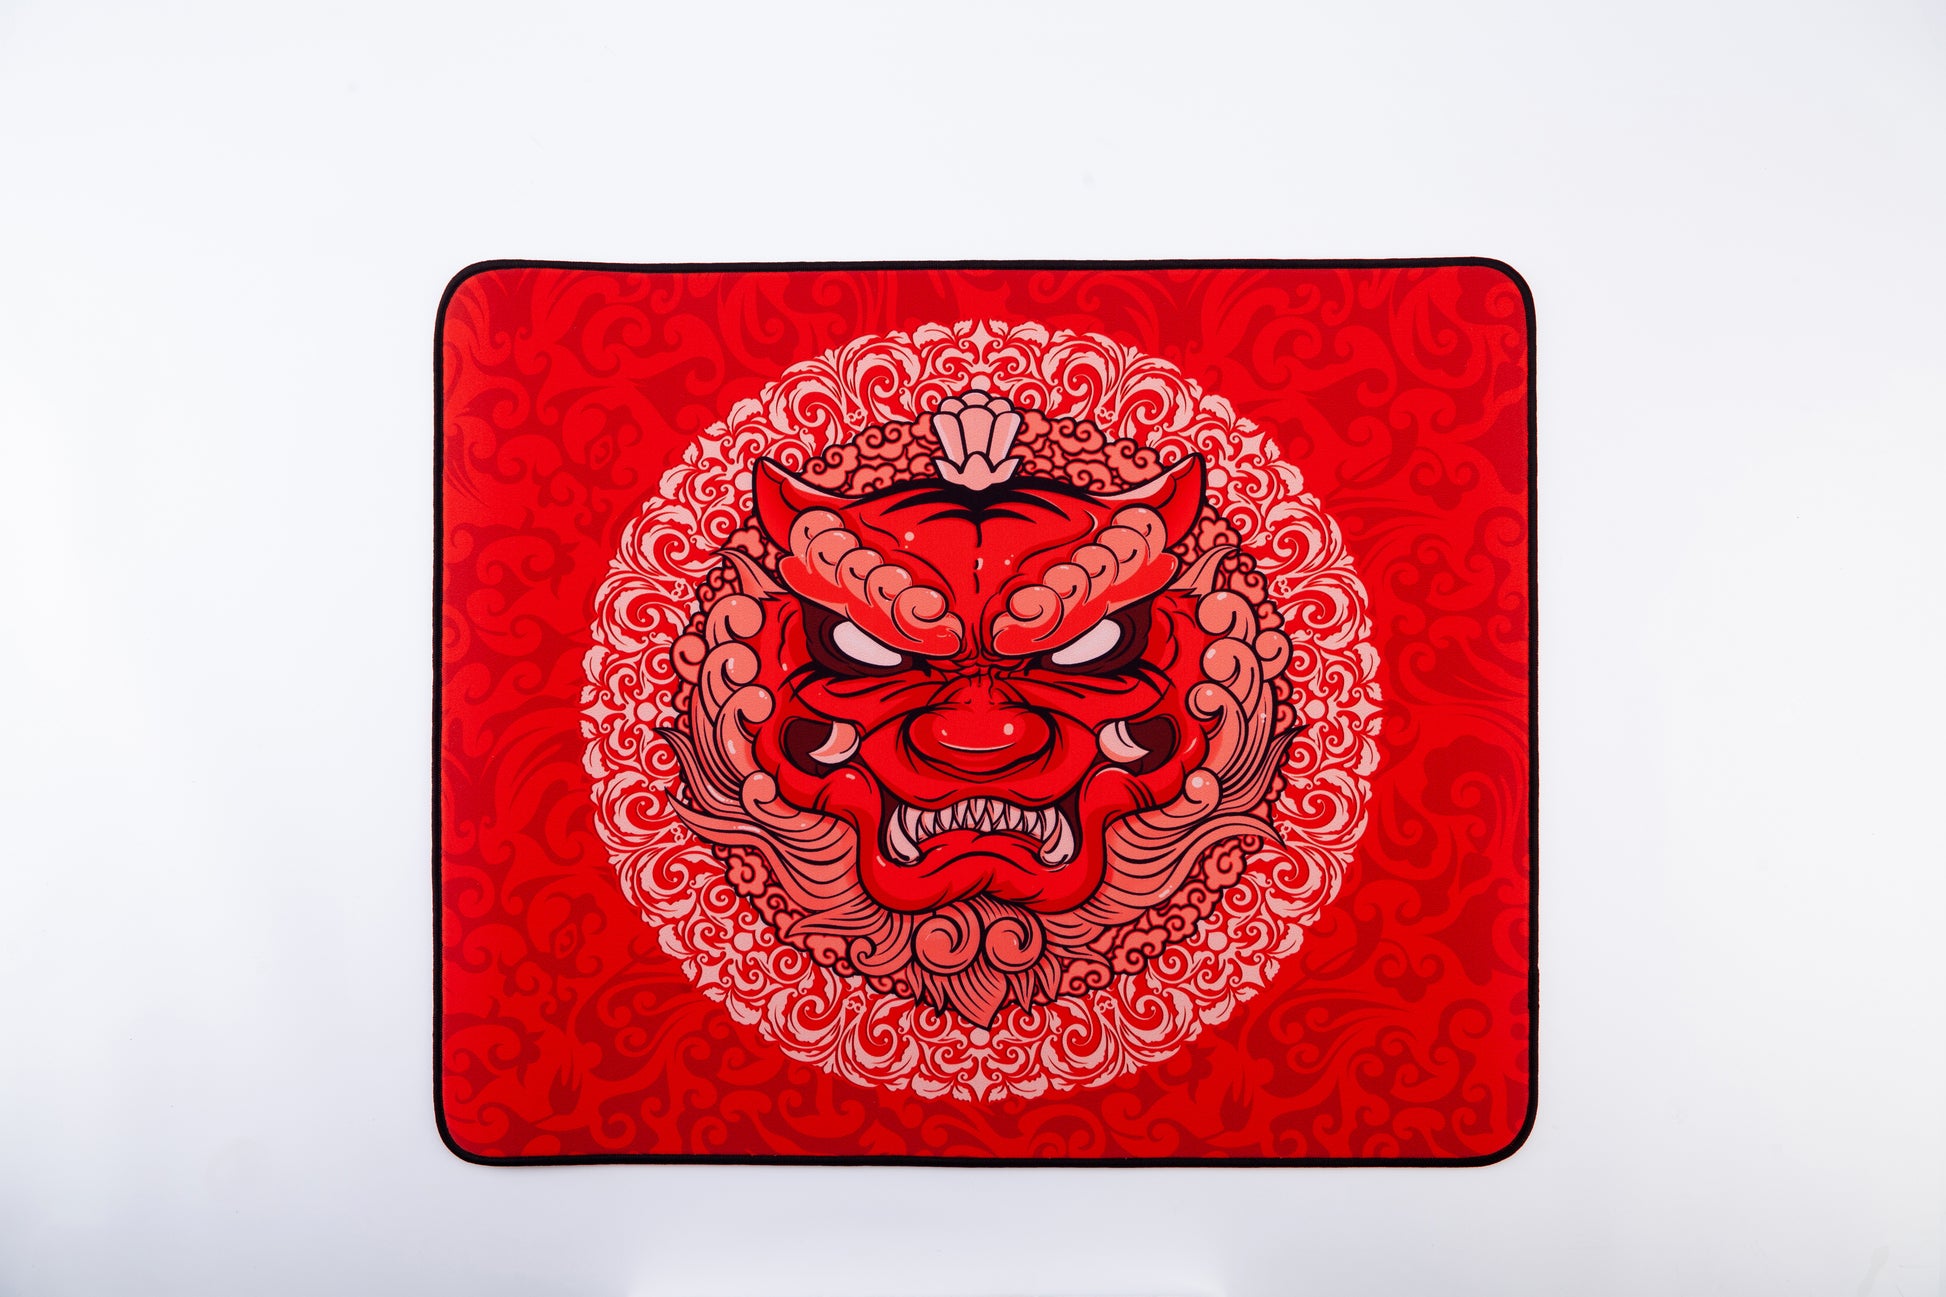 Esptiger LongTeng Gaming Mouse Pad - Red, Stitched Edges, Large (480 x 400 x 4mm)